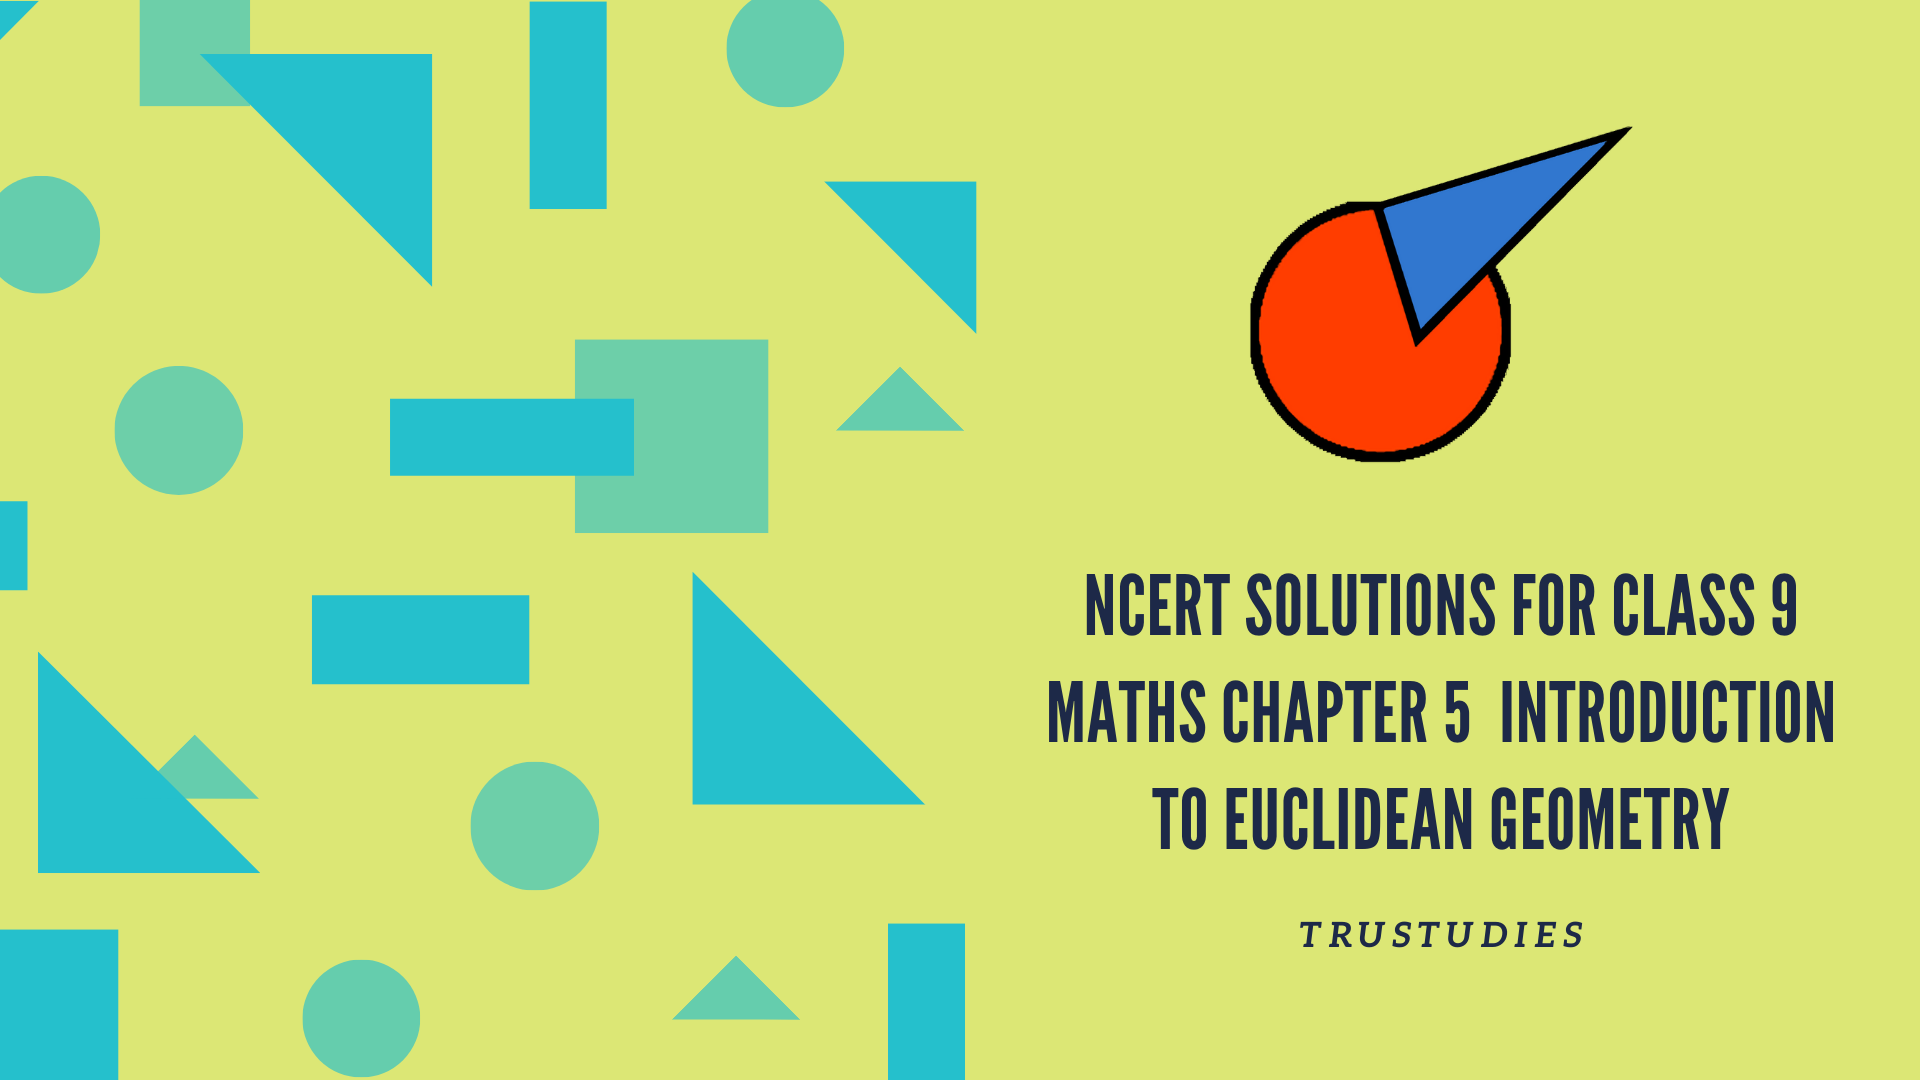 NCERT solutions for class 9 maths chapter 5 introduction to euclidean geometry banner image